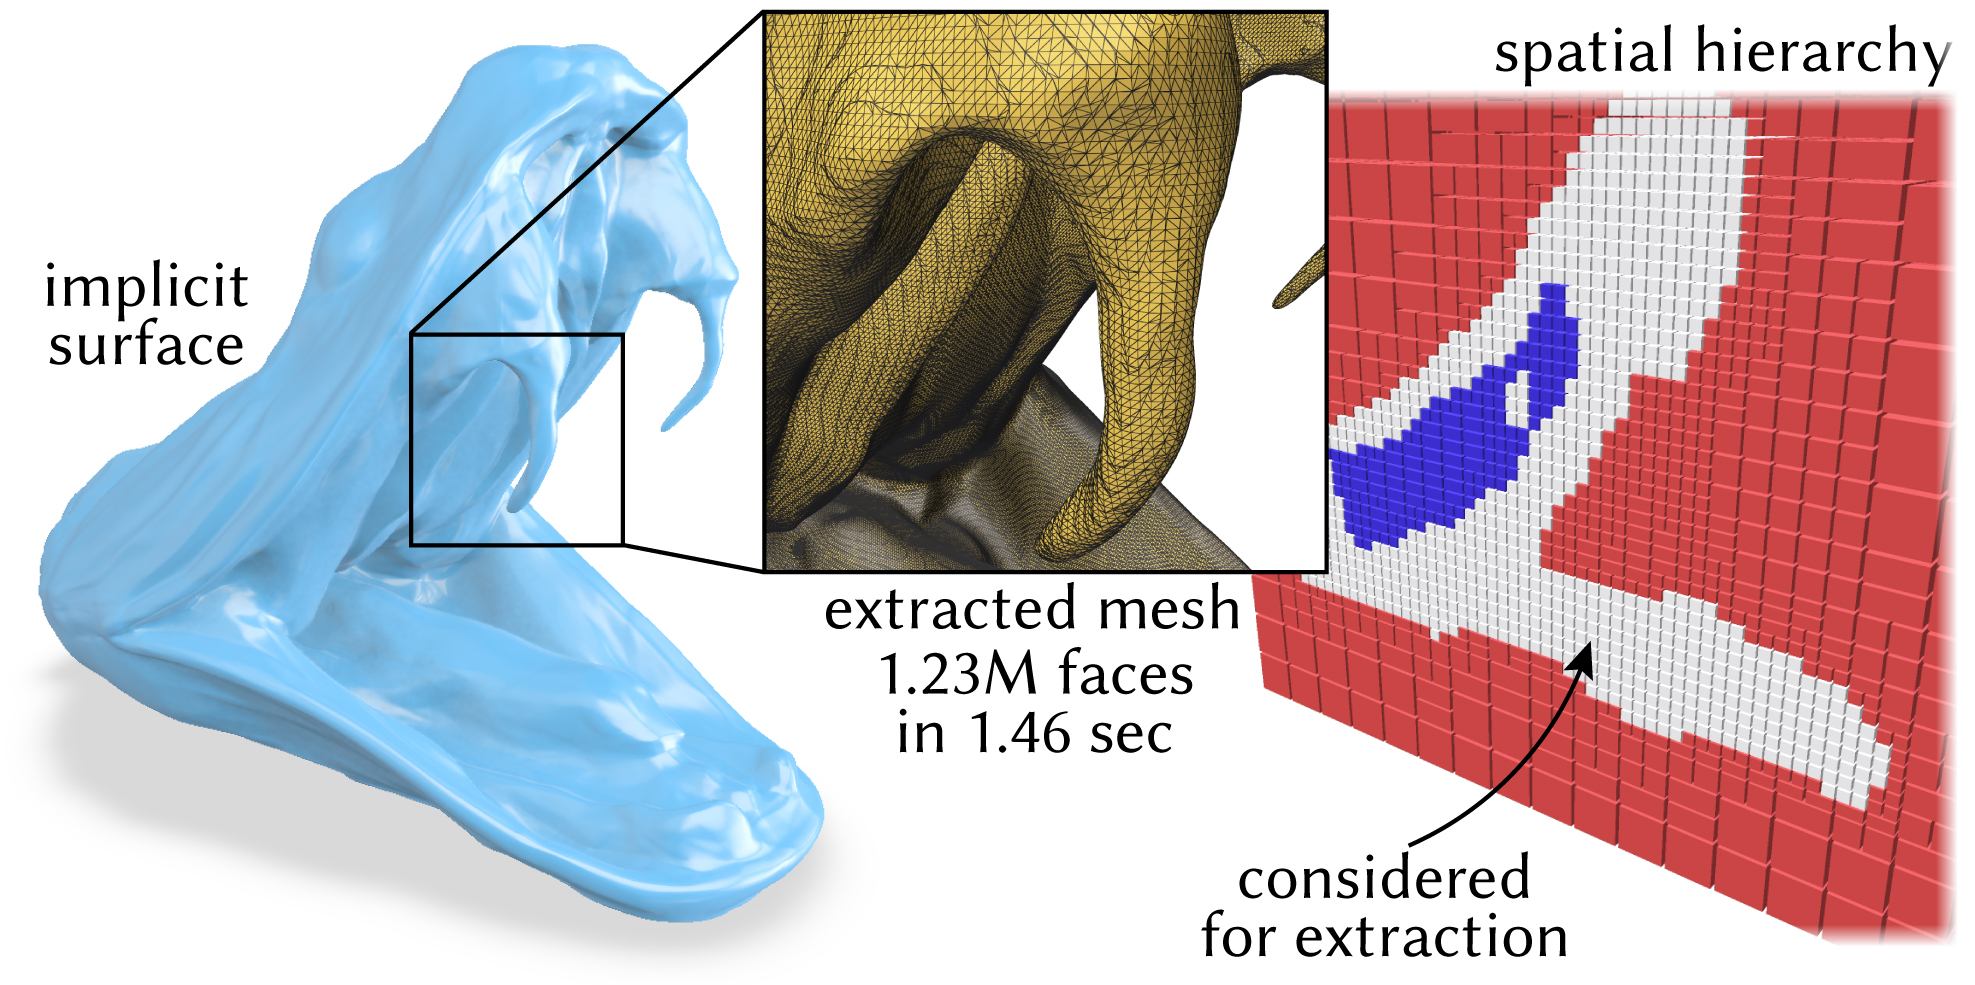 If an explicit mesh is desired, our spatial bounding hierarchy enables an adaptive variant of marching cubes which avoids evaluating the function in large empty regions. This yields the same output as ordinary dense marching cubes, but scales much more efficiently to high-resolution meshes.